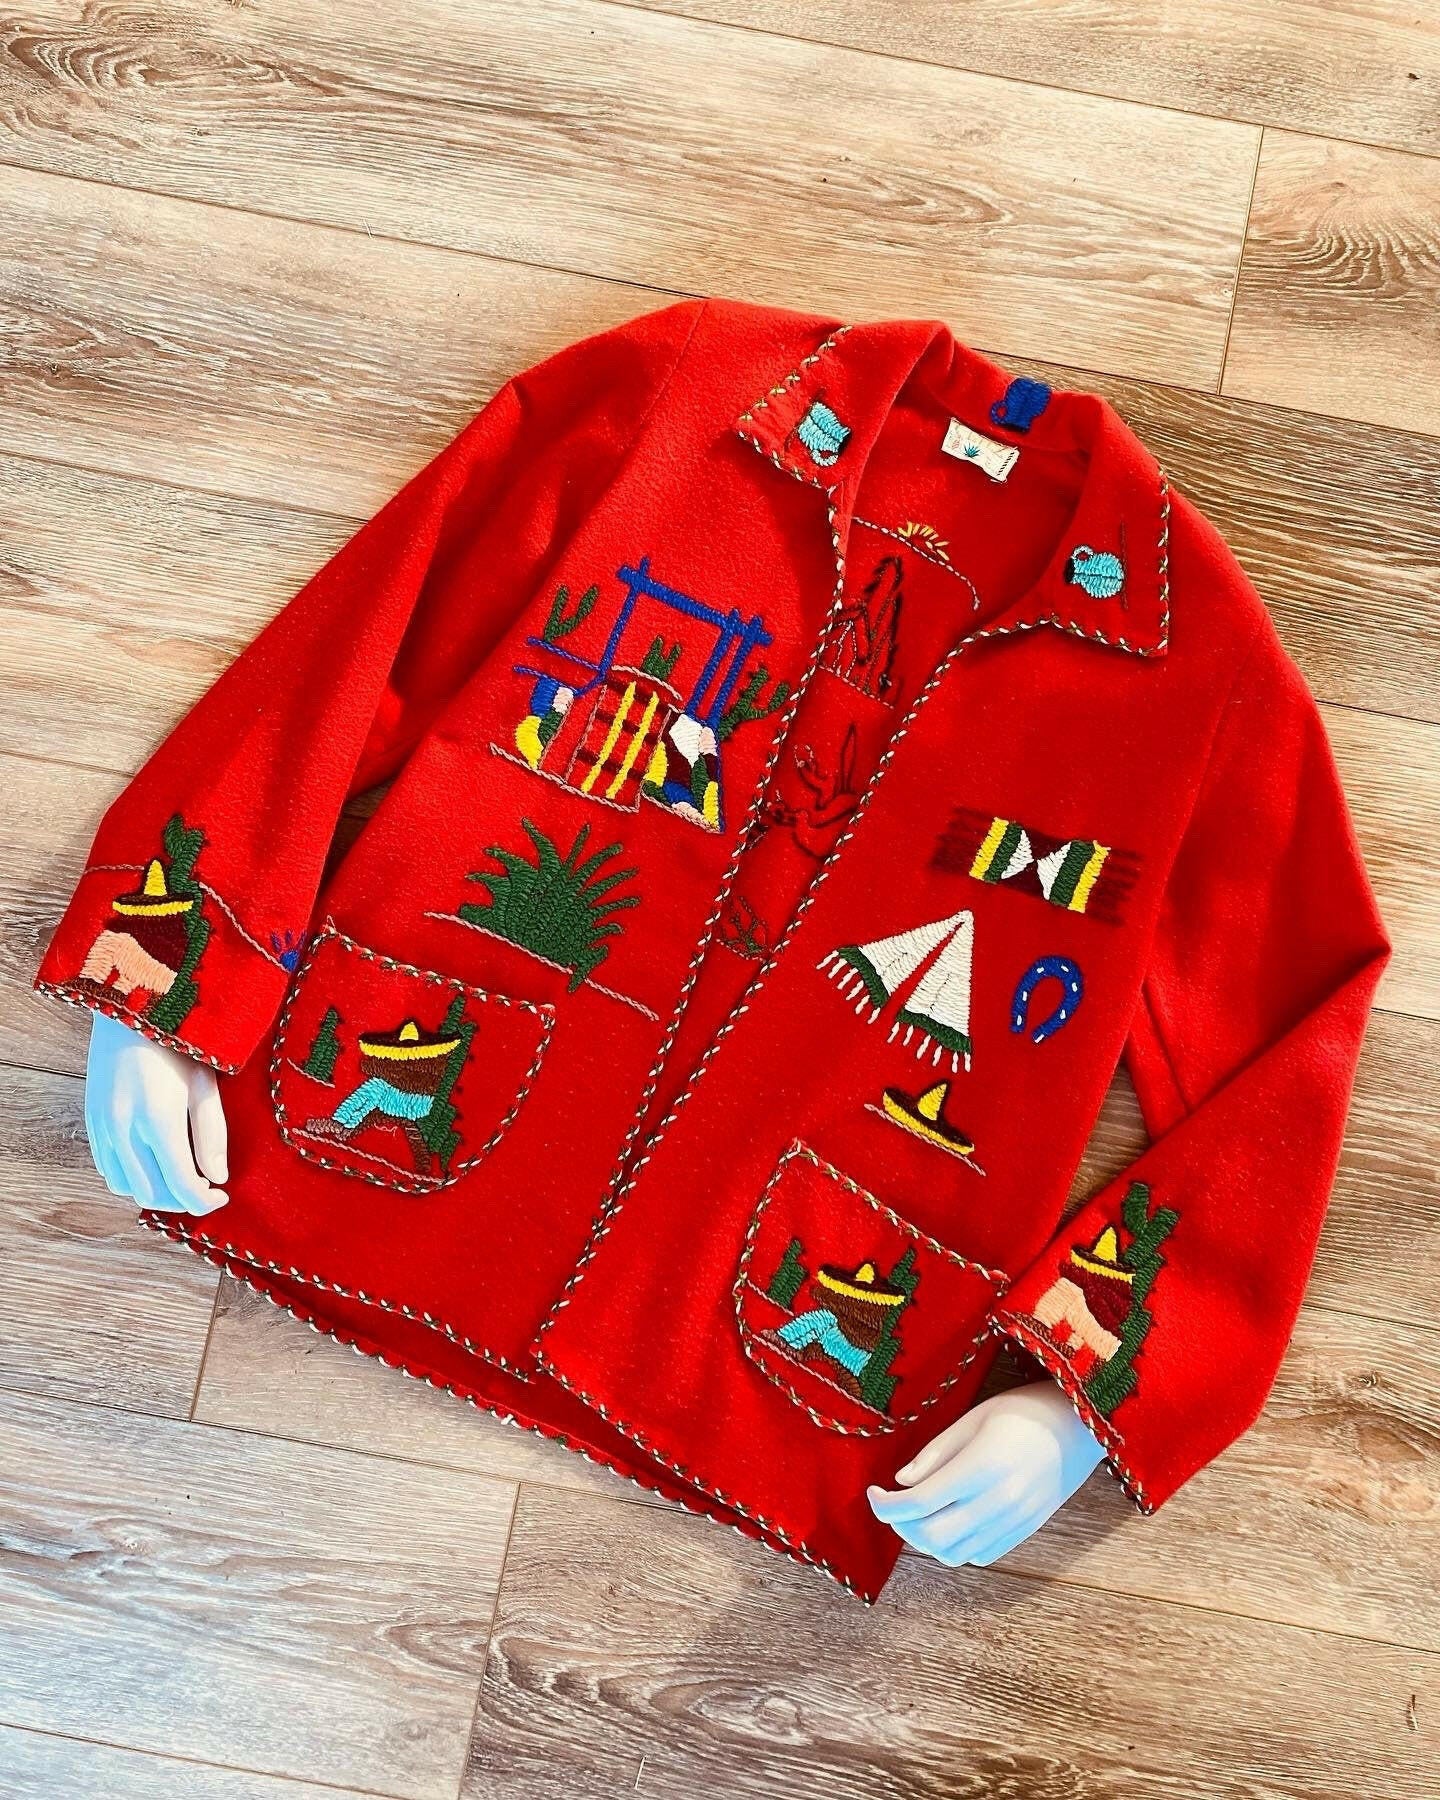 Vintage 1950s Red Mexican Souvenir Jacket / 50s red novelty print coat / 1950s red blazer / Size S